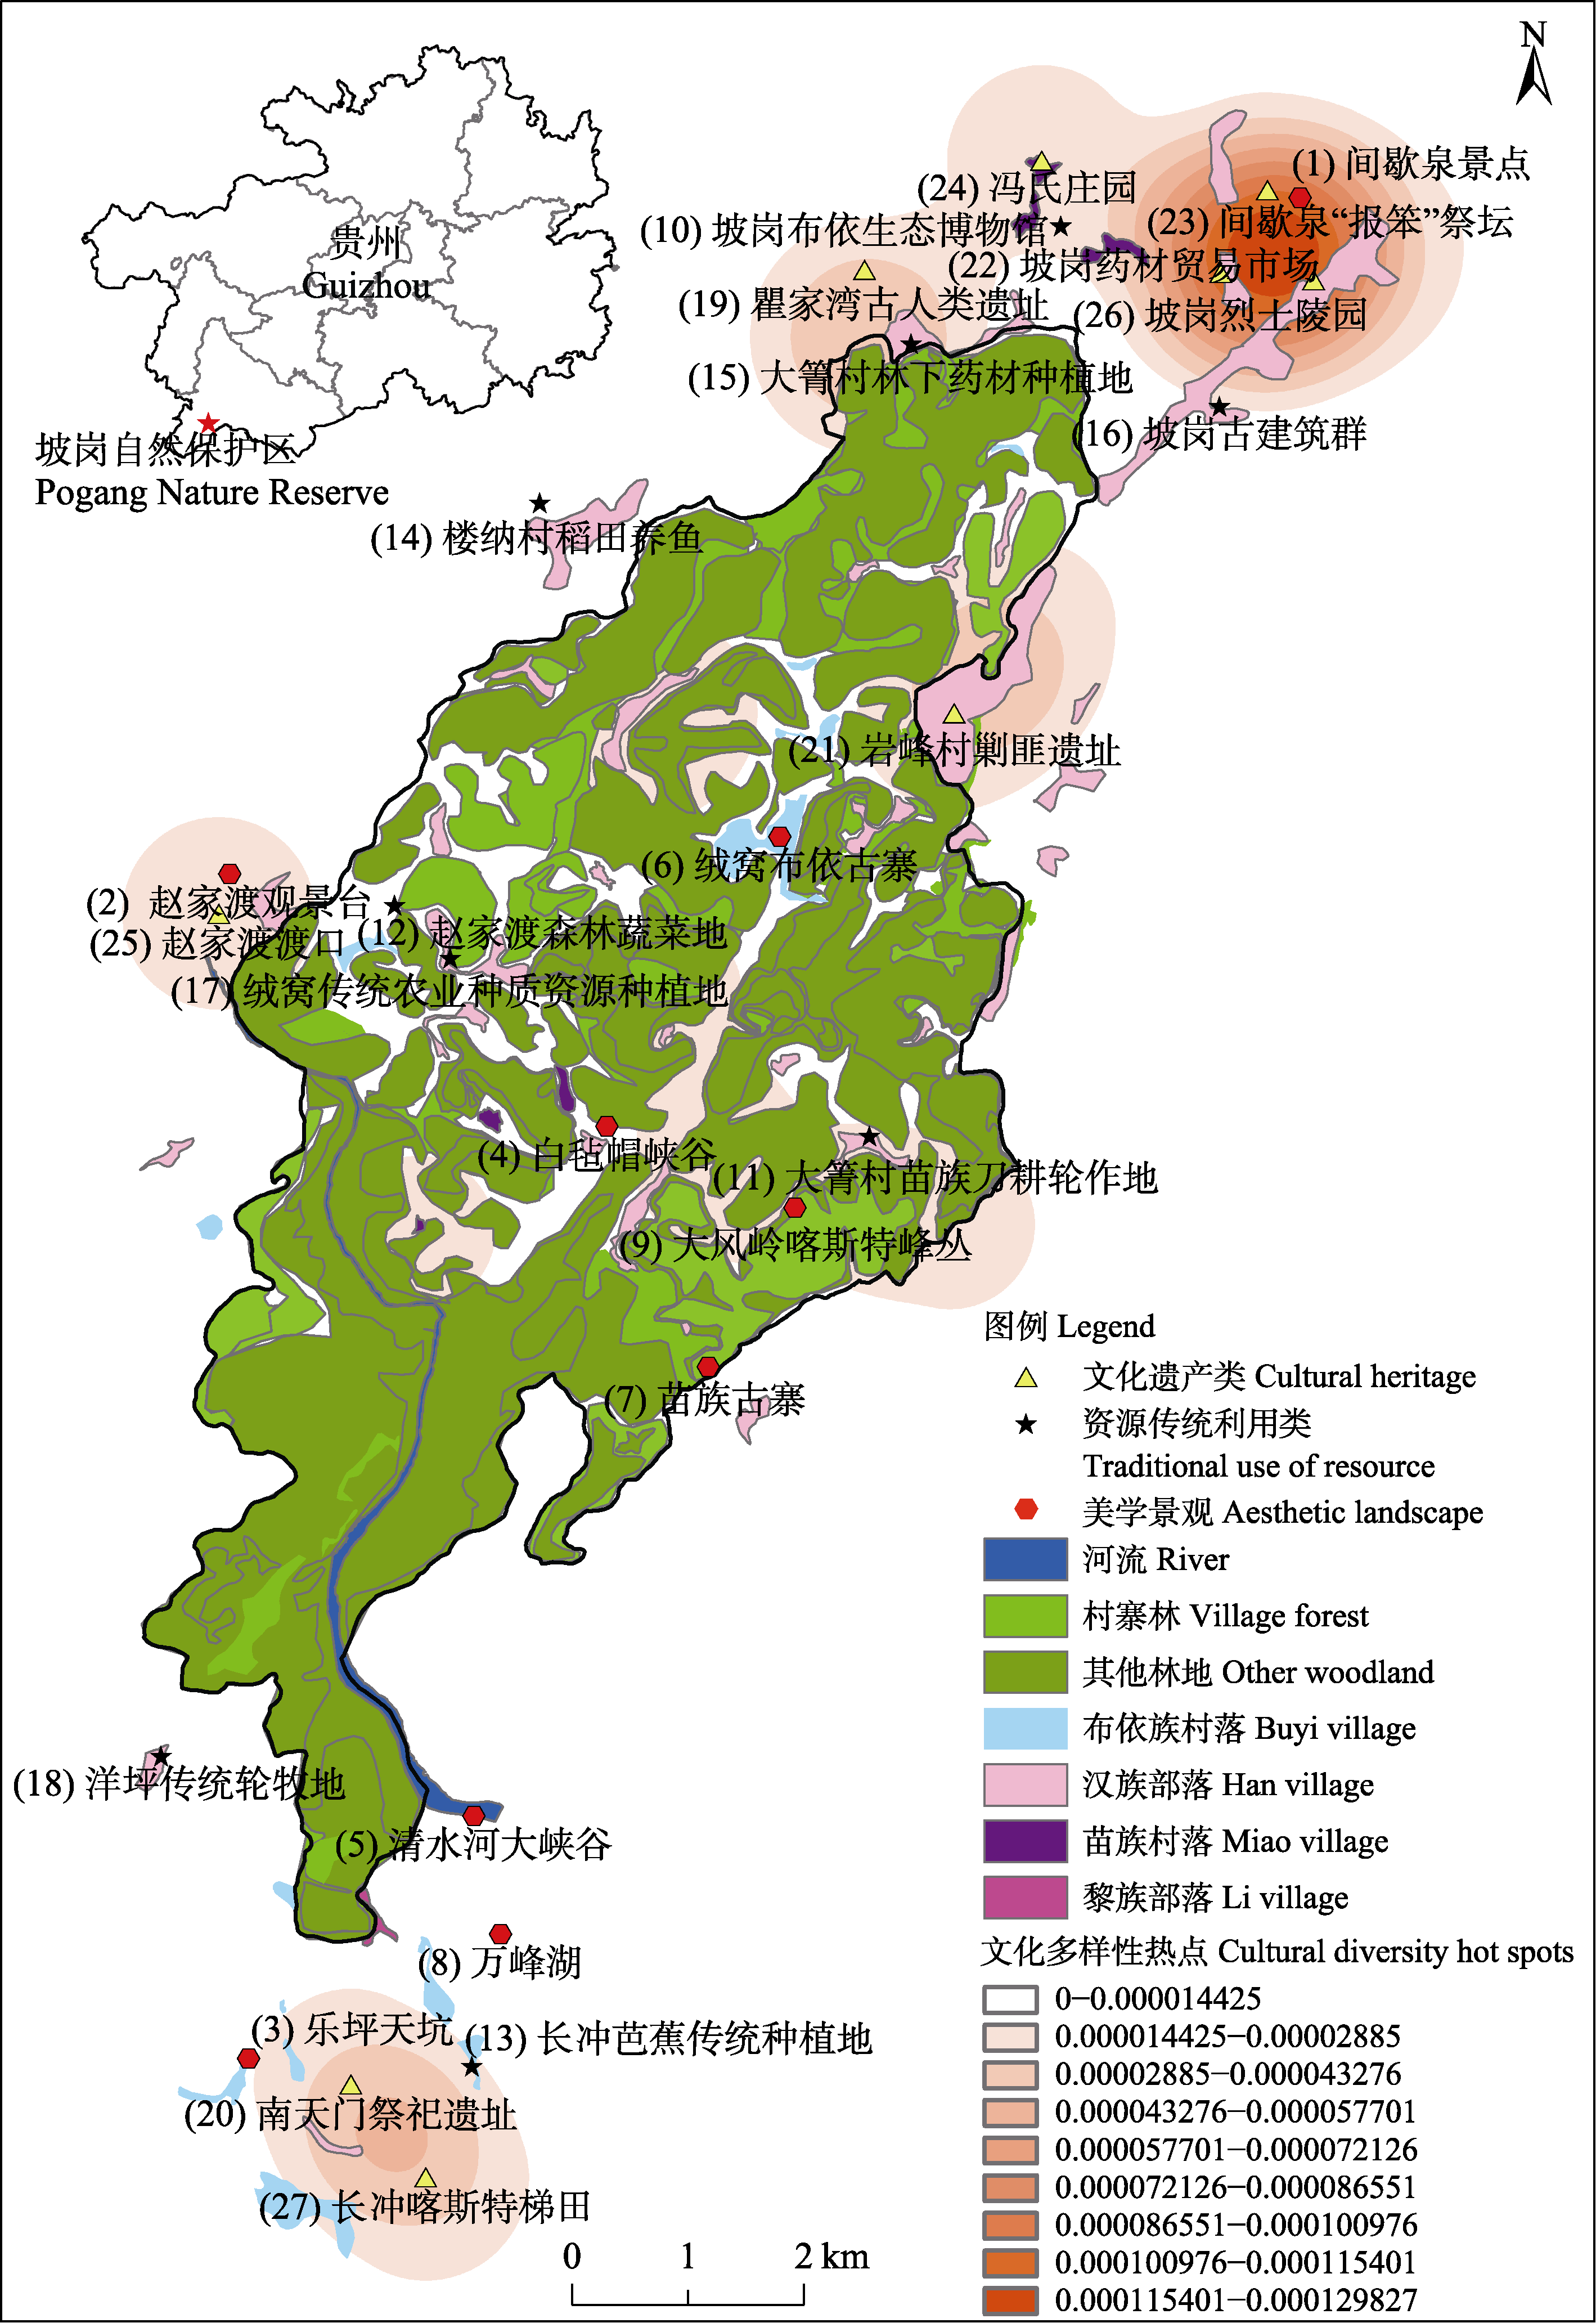 Coupling And Co Evolution Of Biological And Cultural Diversity In The Karst Area Of Southwest China A Case Study Of Pogang Nature Reserve In Guizhou